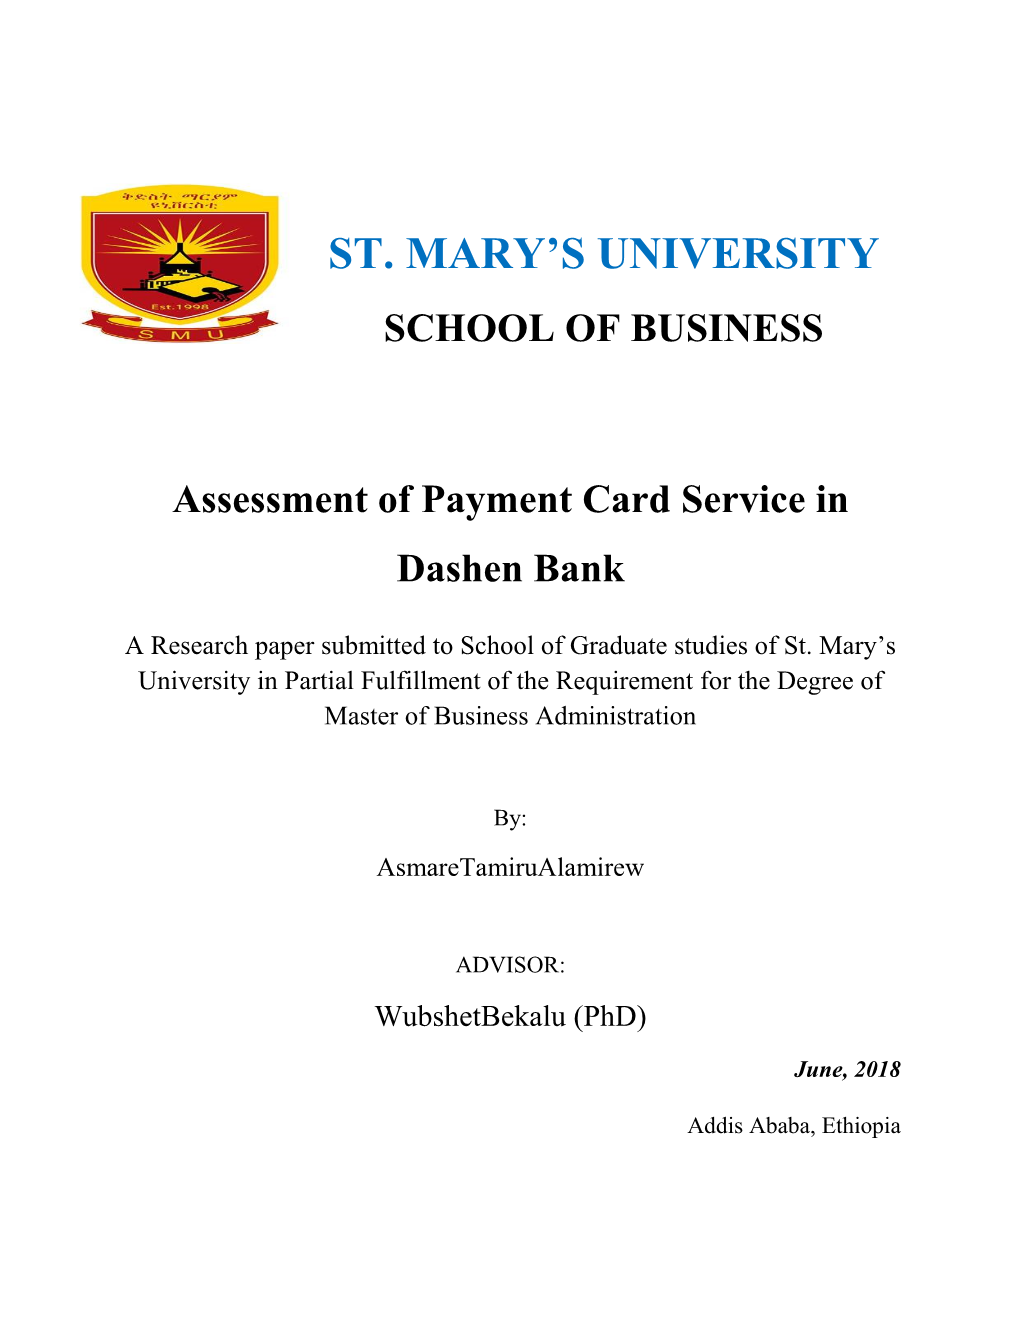 ST. MARY's UNIVERSITY SCHOOL of BUSINESS Assessment Of